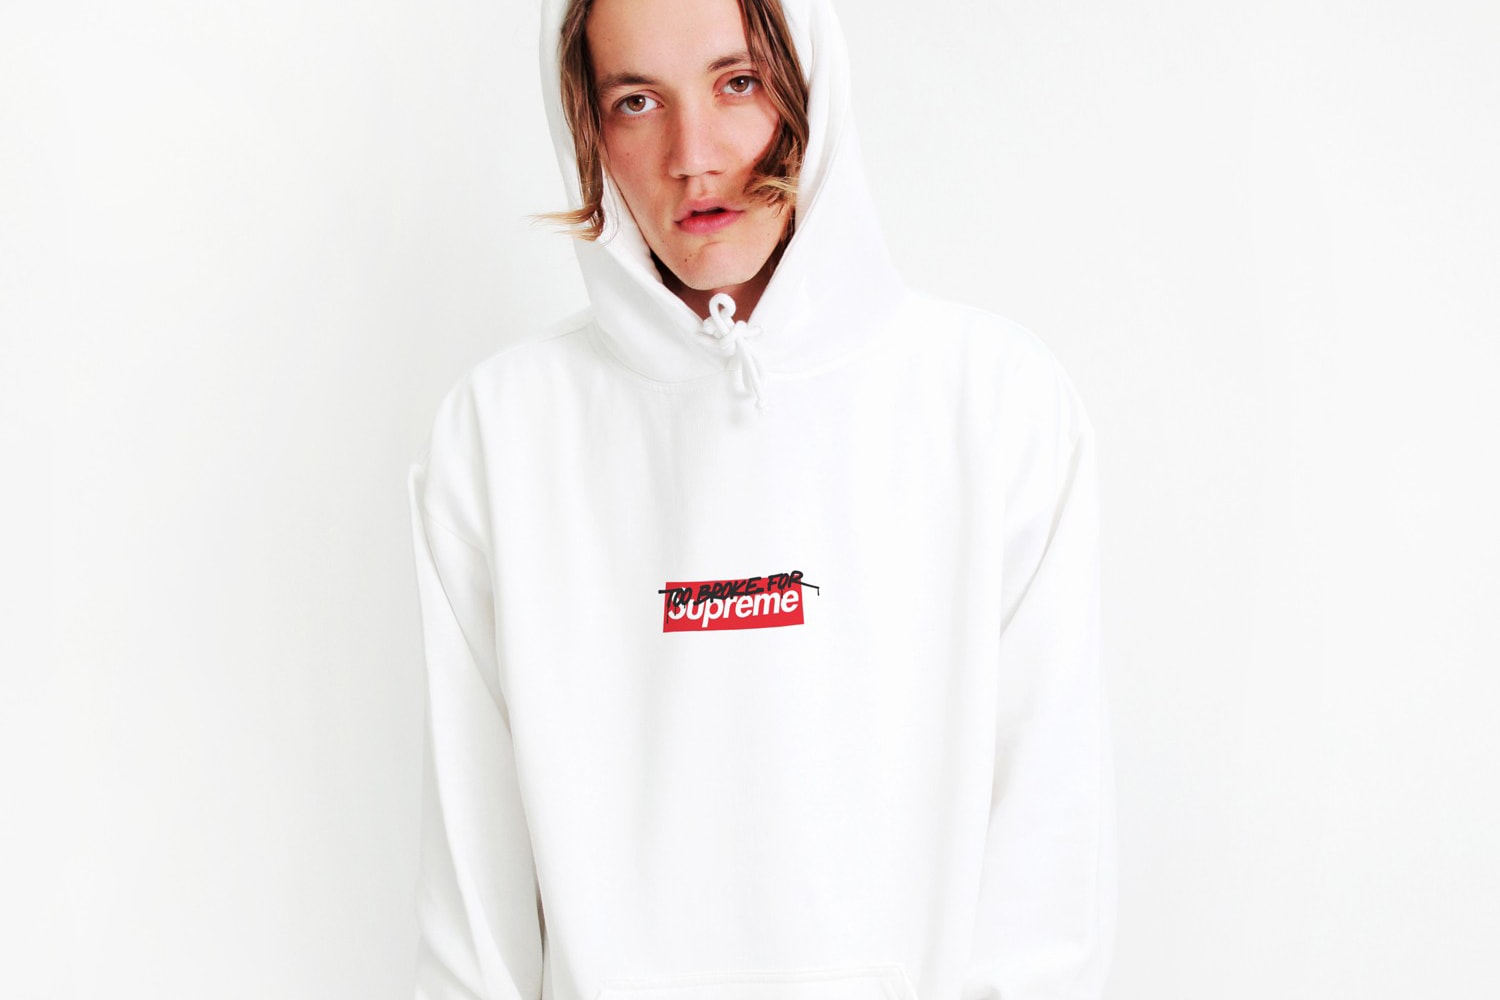 reddits Top Source for Spotting Fake Supreme Is Going Private